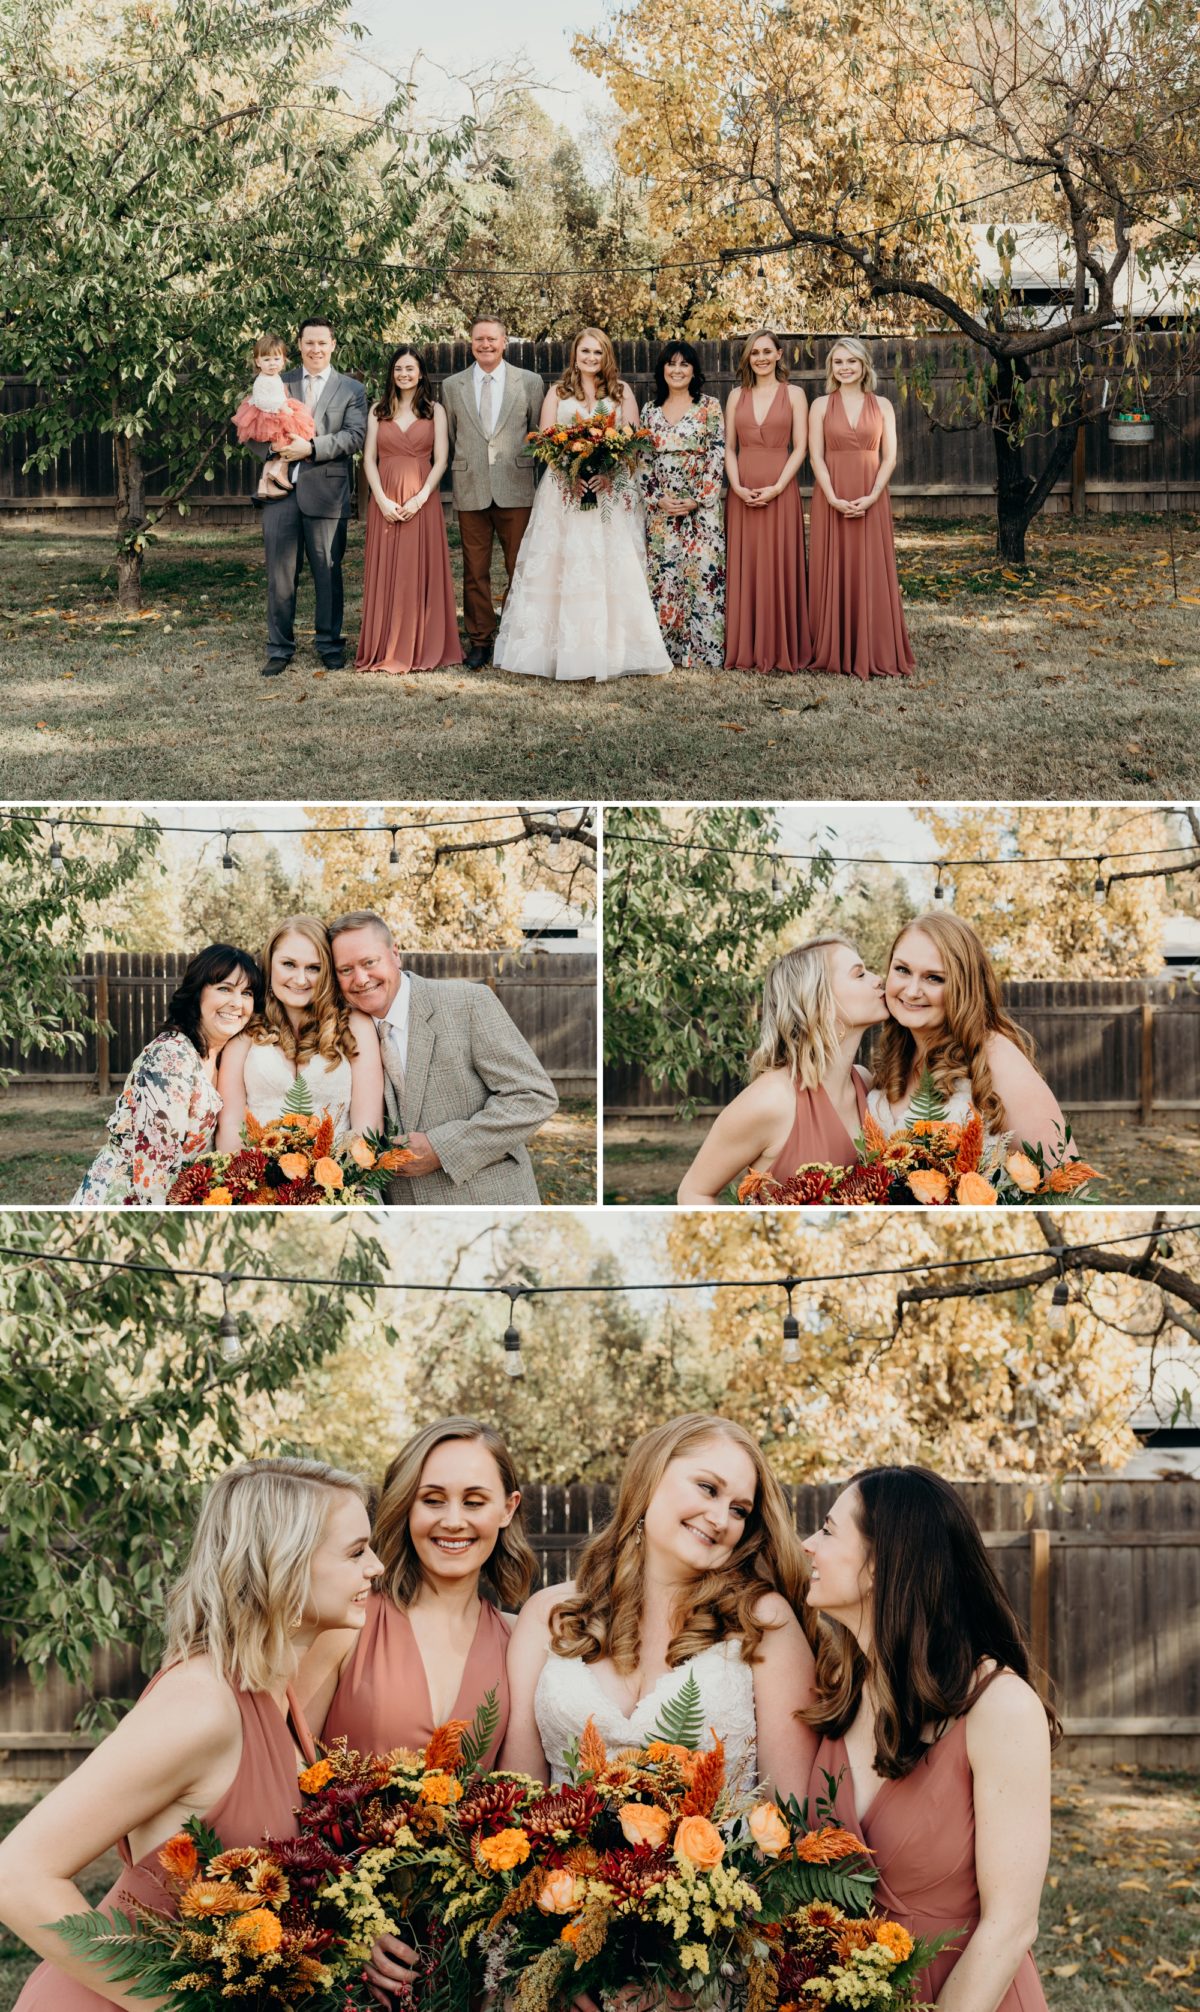 Super cute family and bridesmaid photos in the back yard at this Gridley, CA wedding.